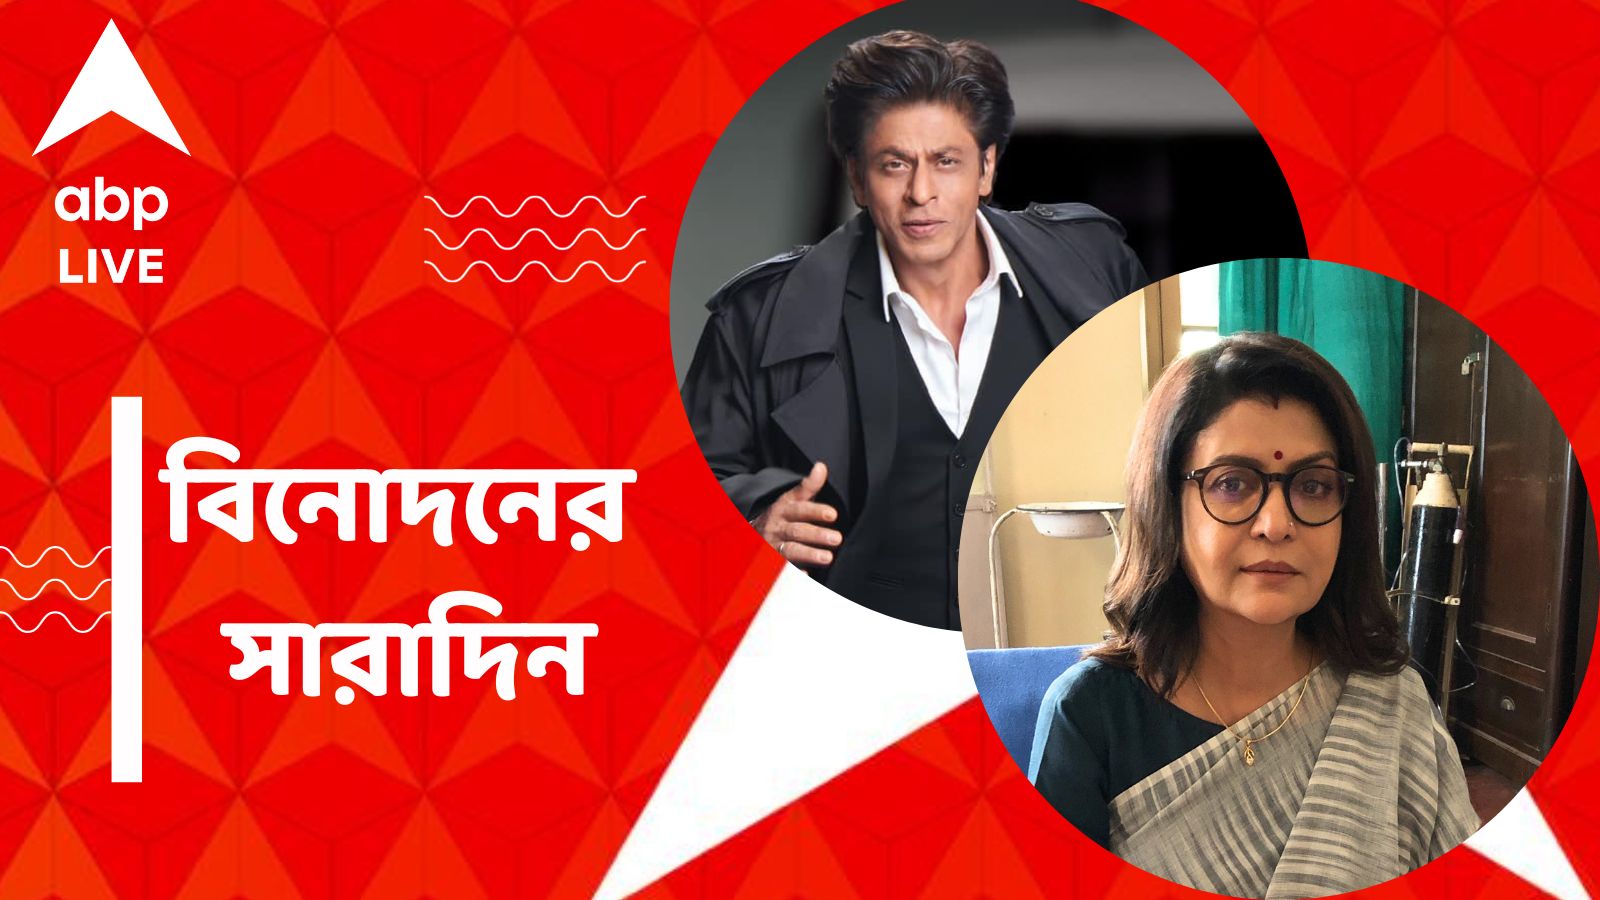 Top Entertainment News Today: King Khan Birthday Coverage Get To Know Top Entertainment News For The Day Which You Can’t Miss, Know In Details